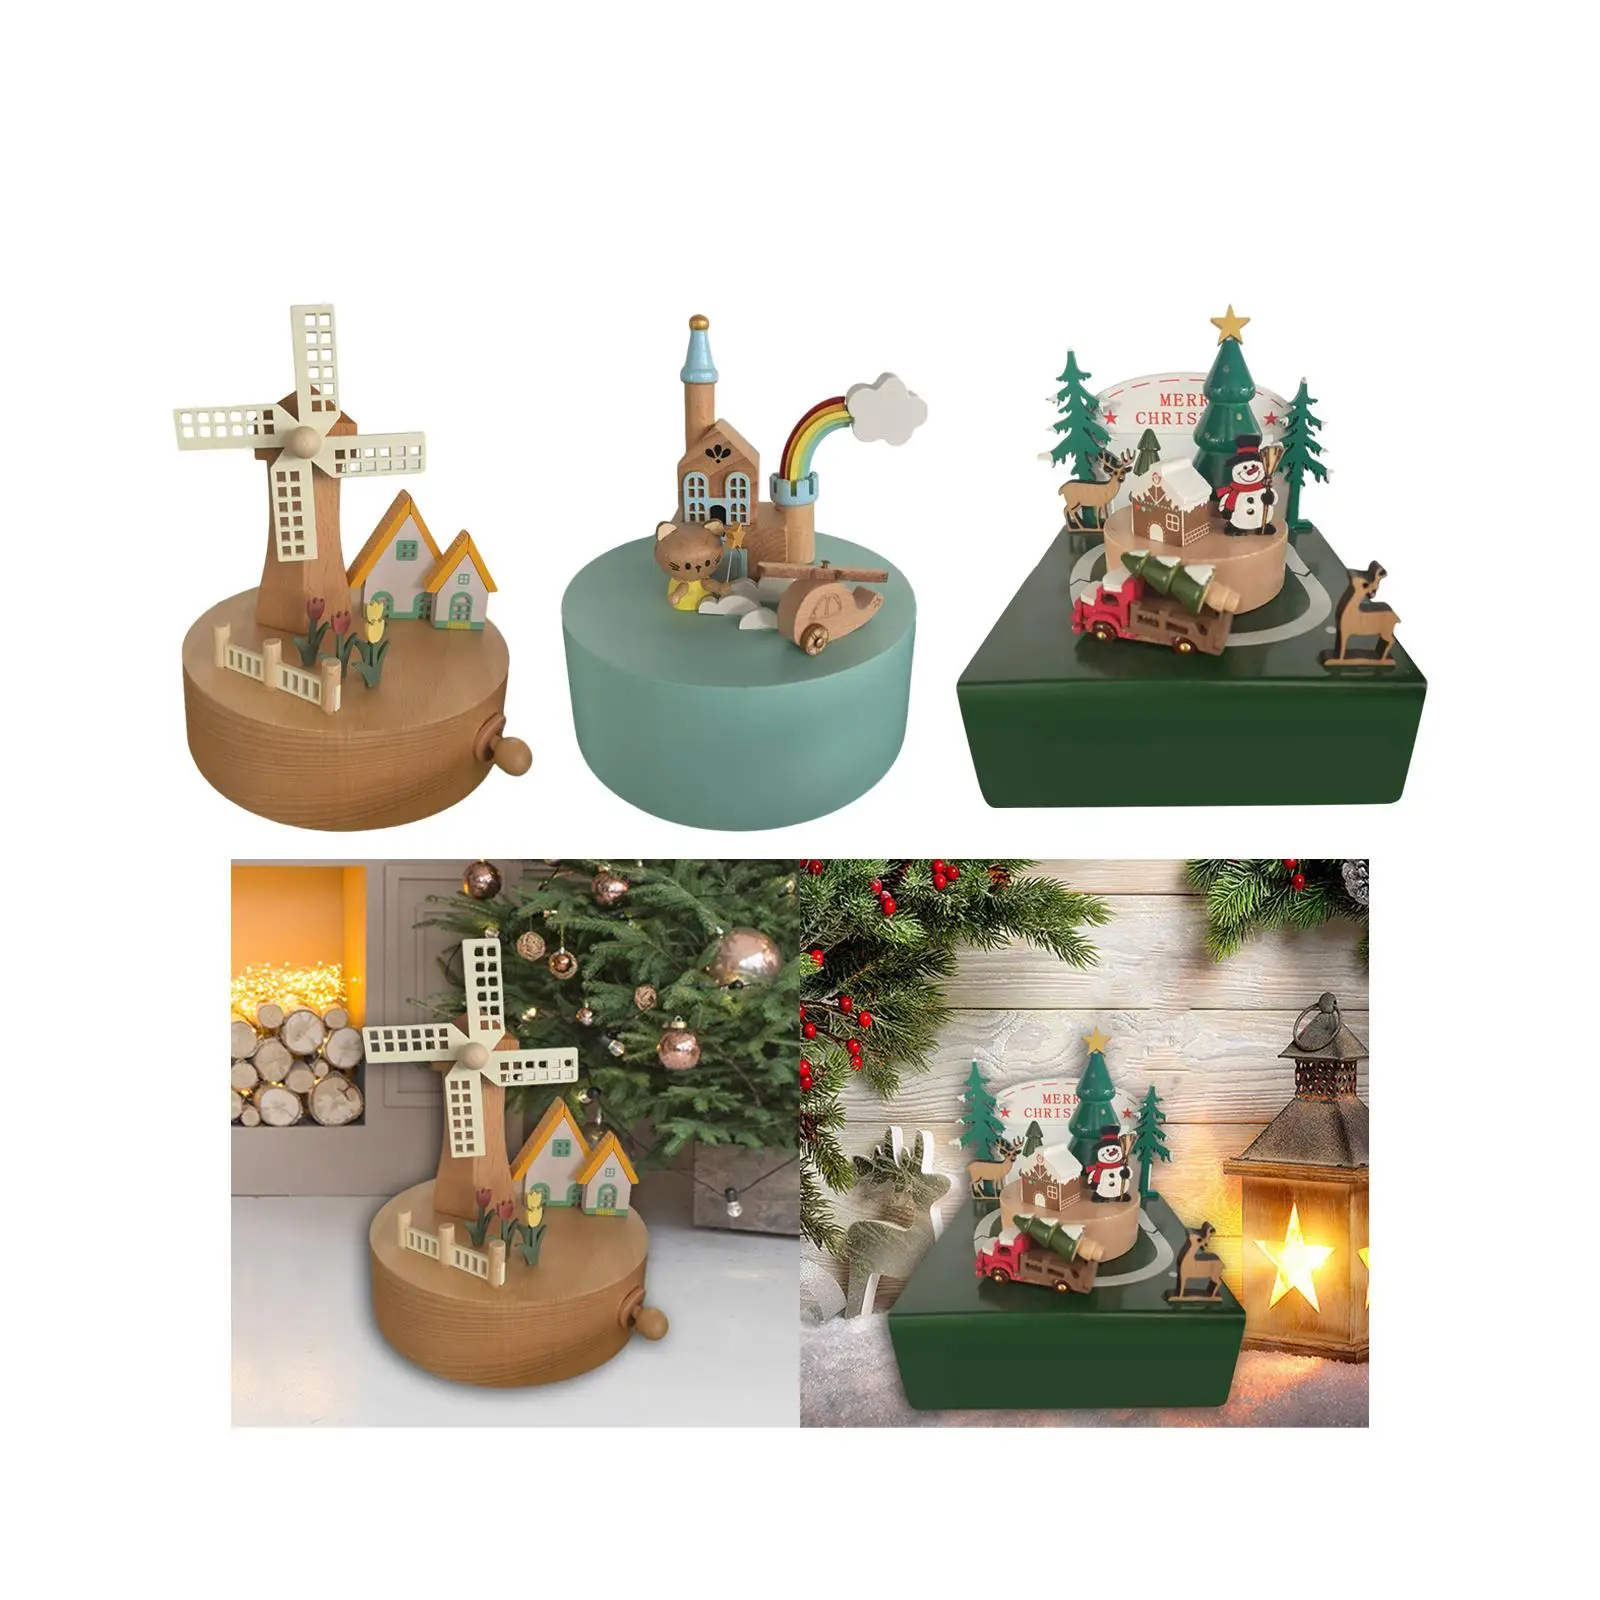 Carousel Music Box Wooden Wood Musical Box for Wedding Holiday Decoration